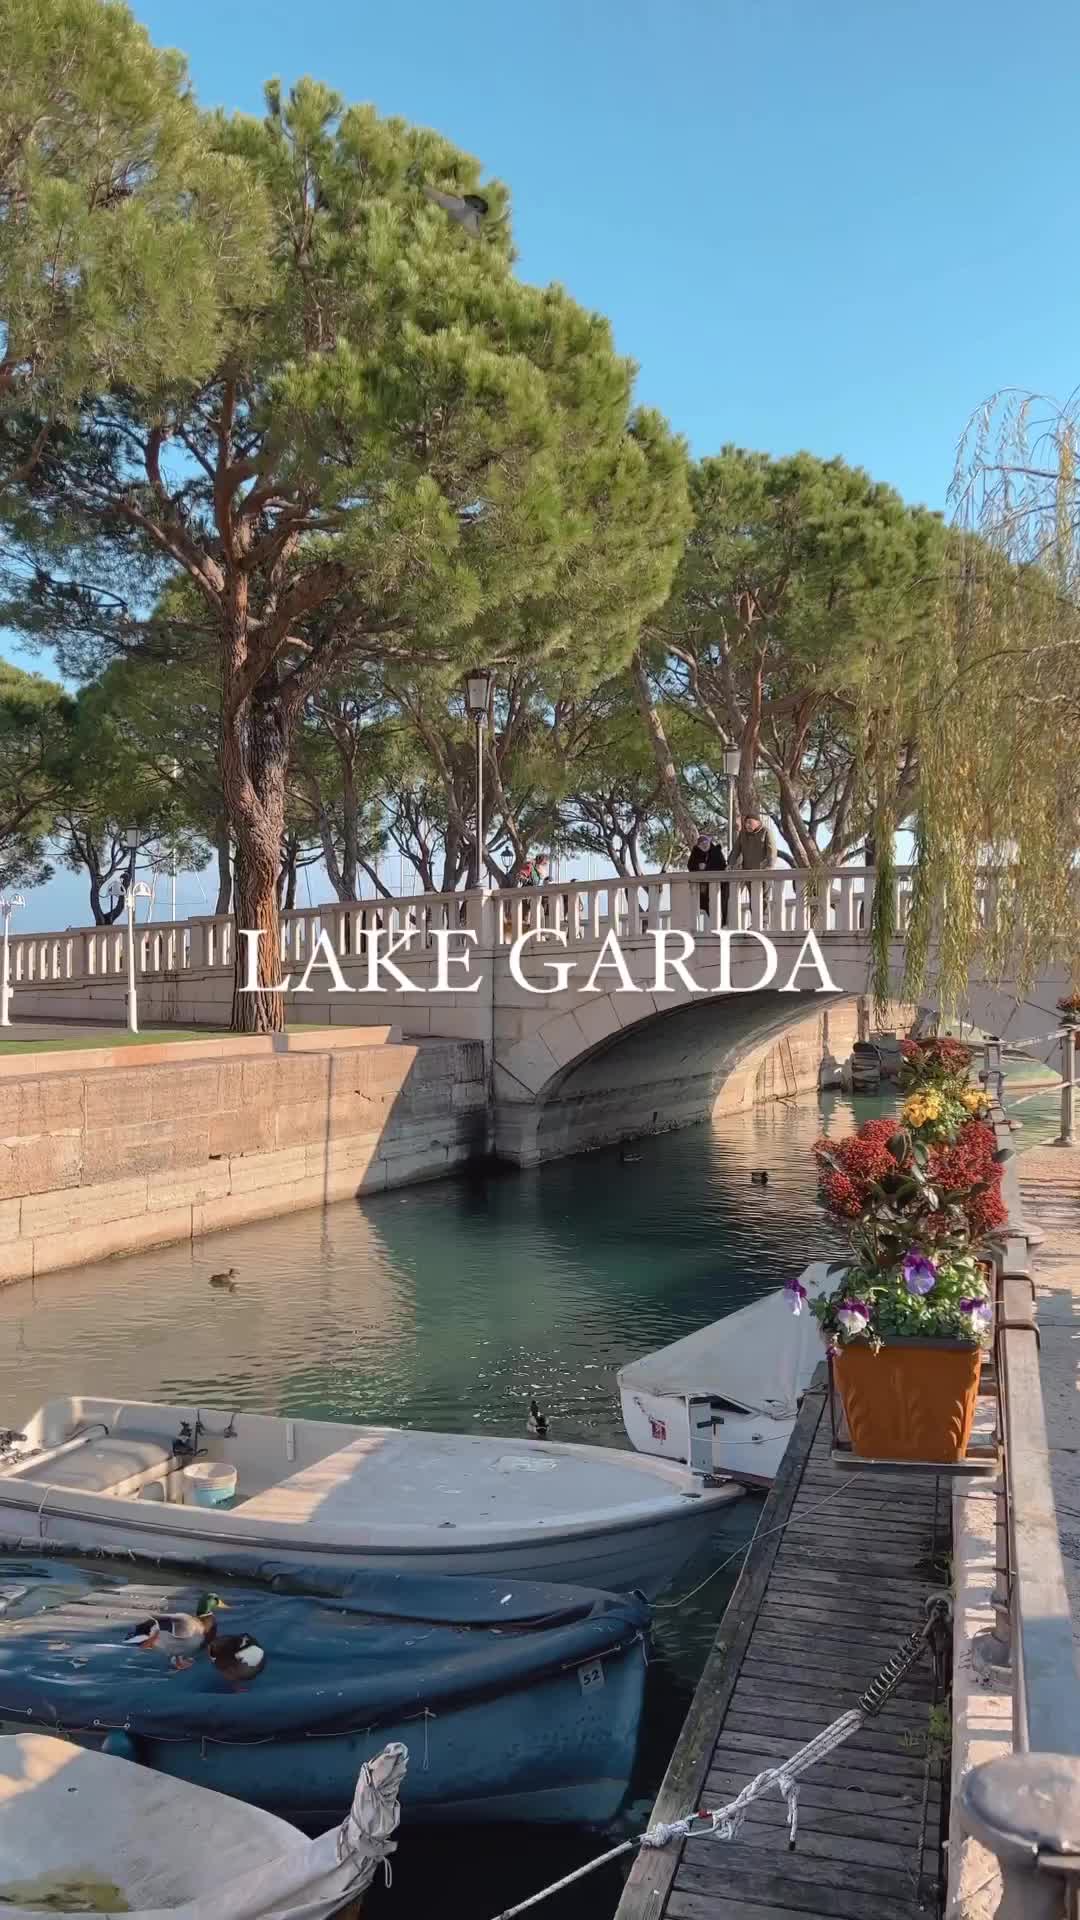 Lake Garda in Italy 🇮🇹💙 There are so many towns to visit around this beautiful lake, in this video there are two of them: Desenzano del Garda and Sirmione 😍
They are the only towns I visited so far, but certainly a great introduction to this place. I’ll definitely come back soon to discover even more towns.
Is this lake already on your bucket list? 🥰
.
.
.
.
#italianplaces #italiait #thatsdarling #italy #map_of_europe #italiainunoscatto #theprettycities #hello_worldpics #culturetrip #cntraveler #travellingthroughtheworld #italy_vacations #italygram #italylovers #passionpassport #lakegarda #lagodigarda #sirmione #tlpicks #beautifuldestinations #italytravel #iamatraveler #italia #inlombardia #desenzano #italia365 #igersitalia #italiabella #instaitalia Visit Italy, Italia, Italy, Lago di Garda, Lombardia